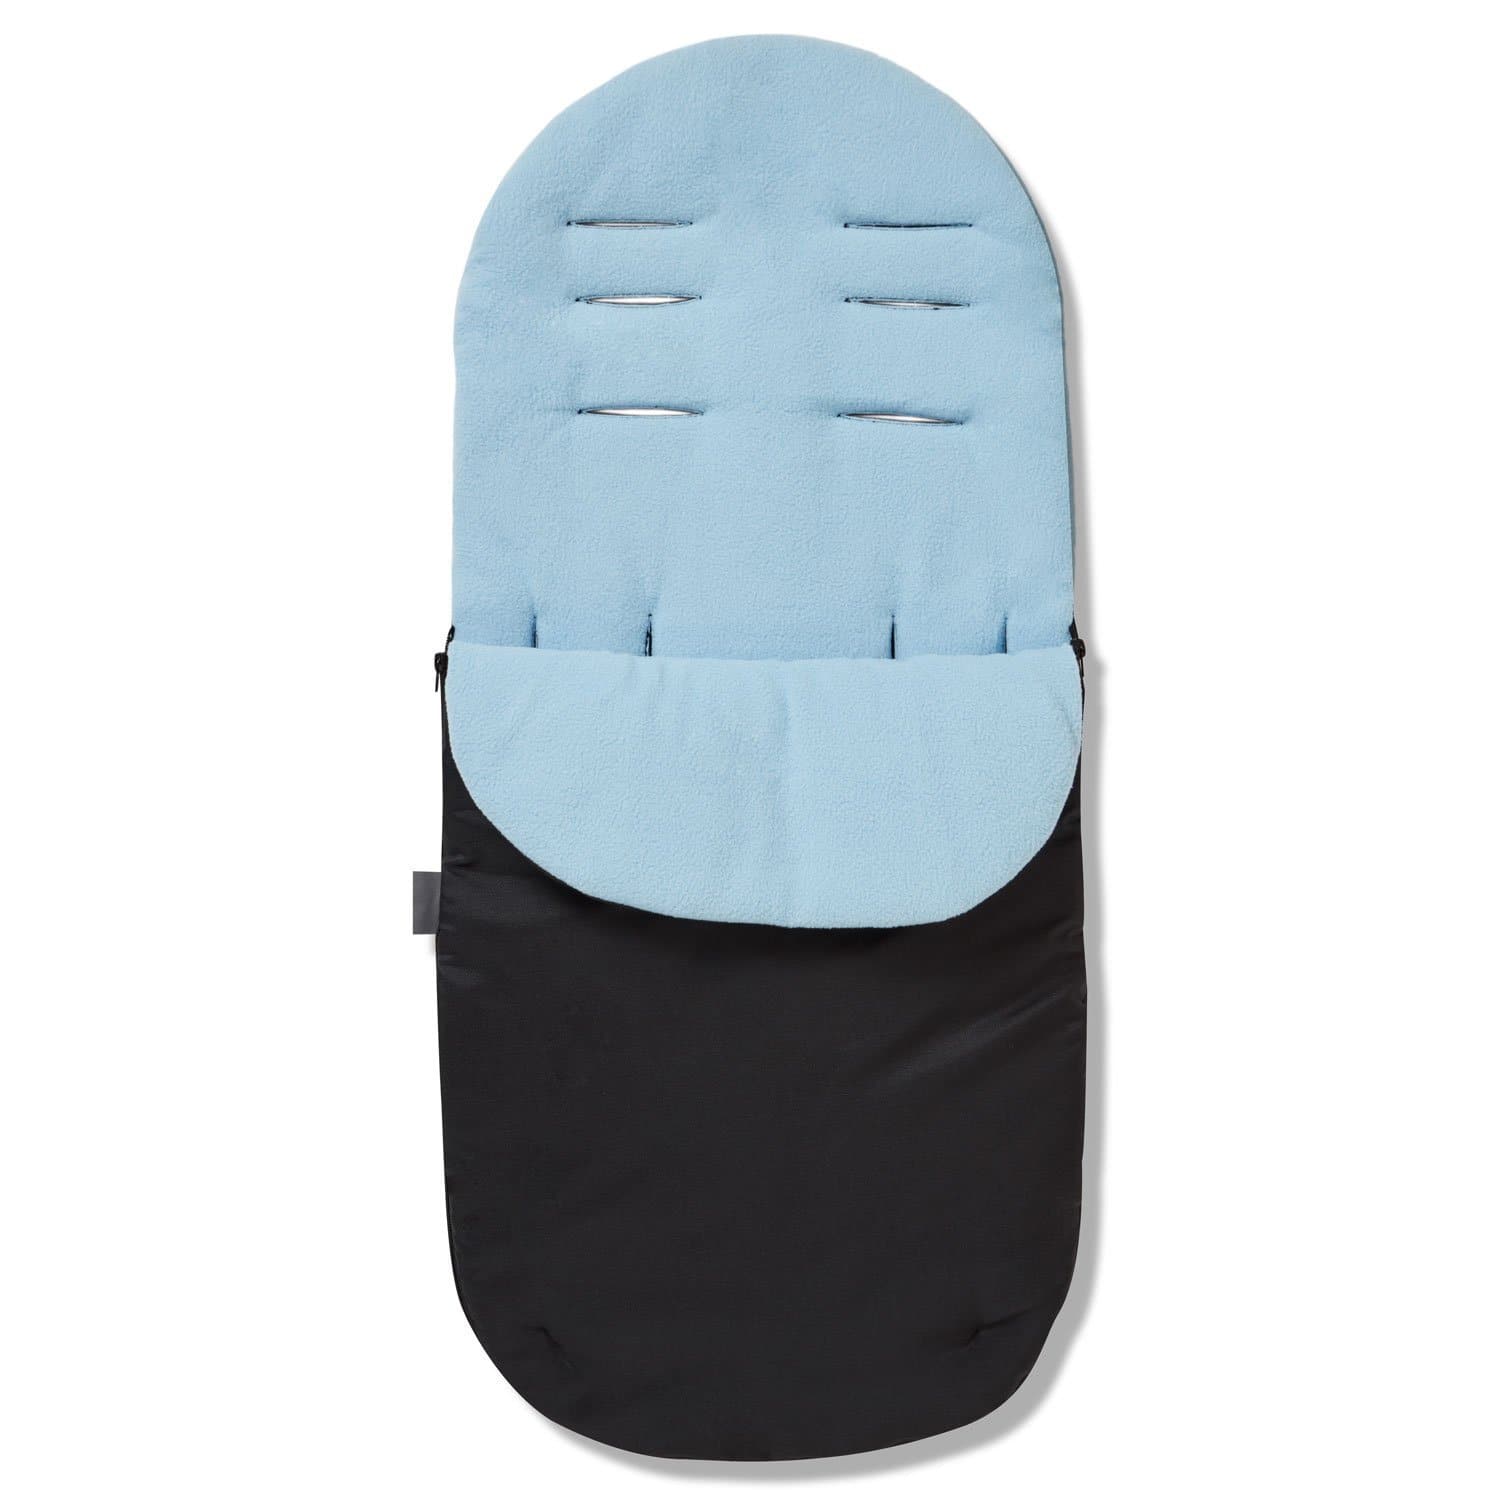 Footmuff / Cosy Toes Compatible with Babylo - Light Blue / Fits All Models | For Your Little One